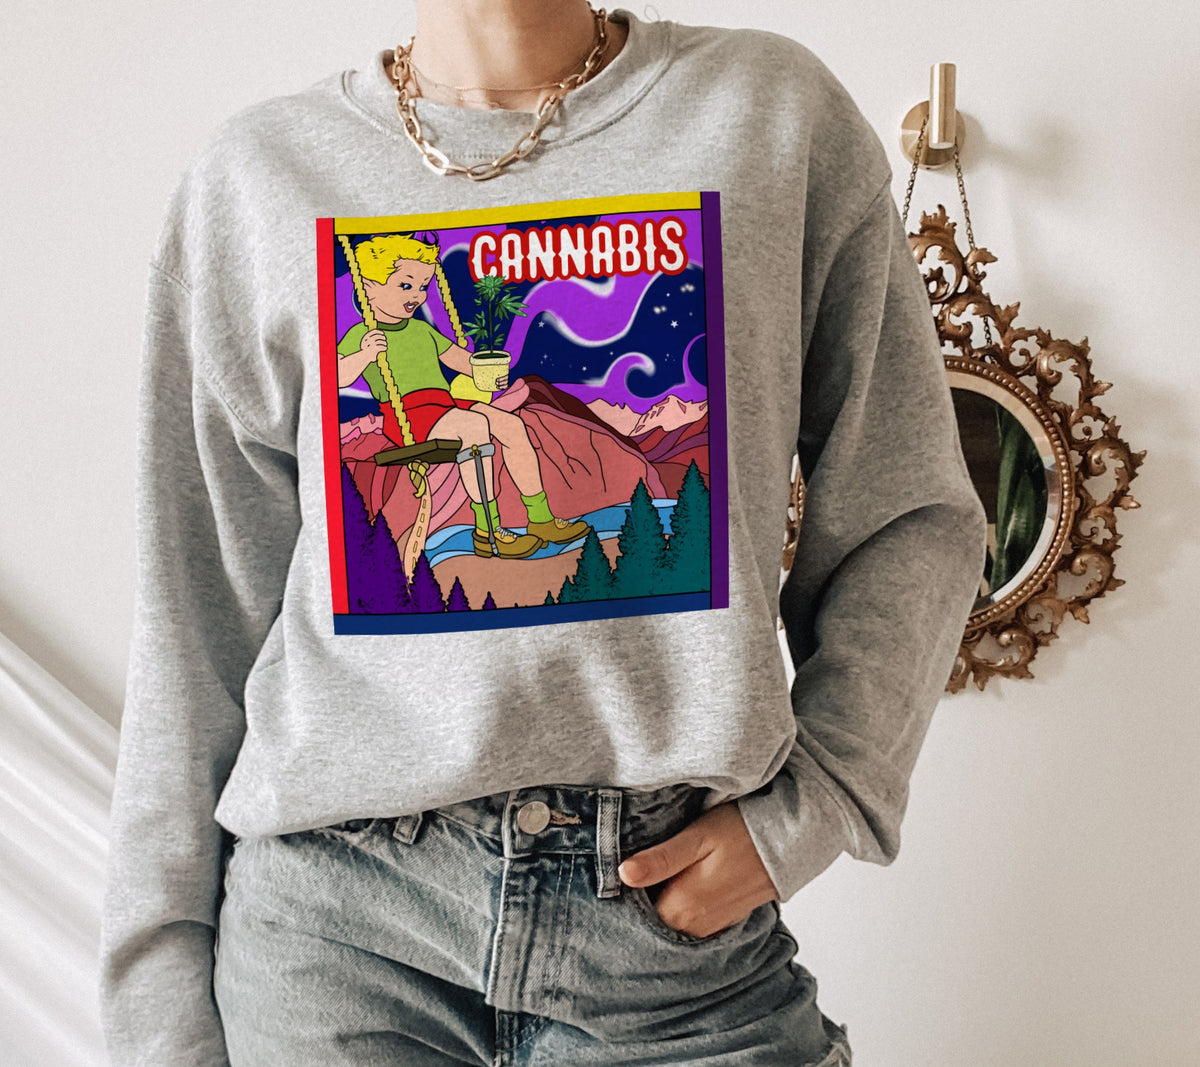 grey sweater with a cannabis plant - HighCiti